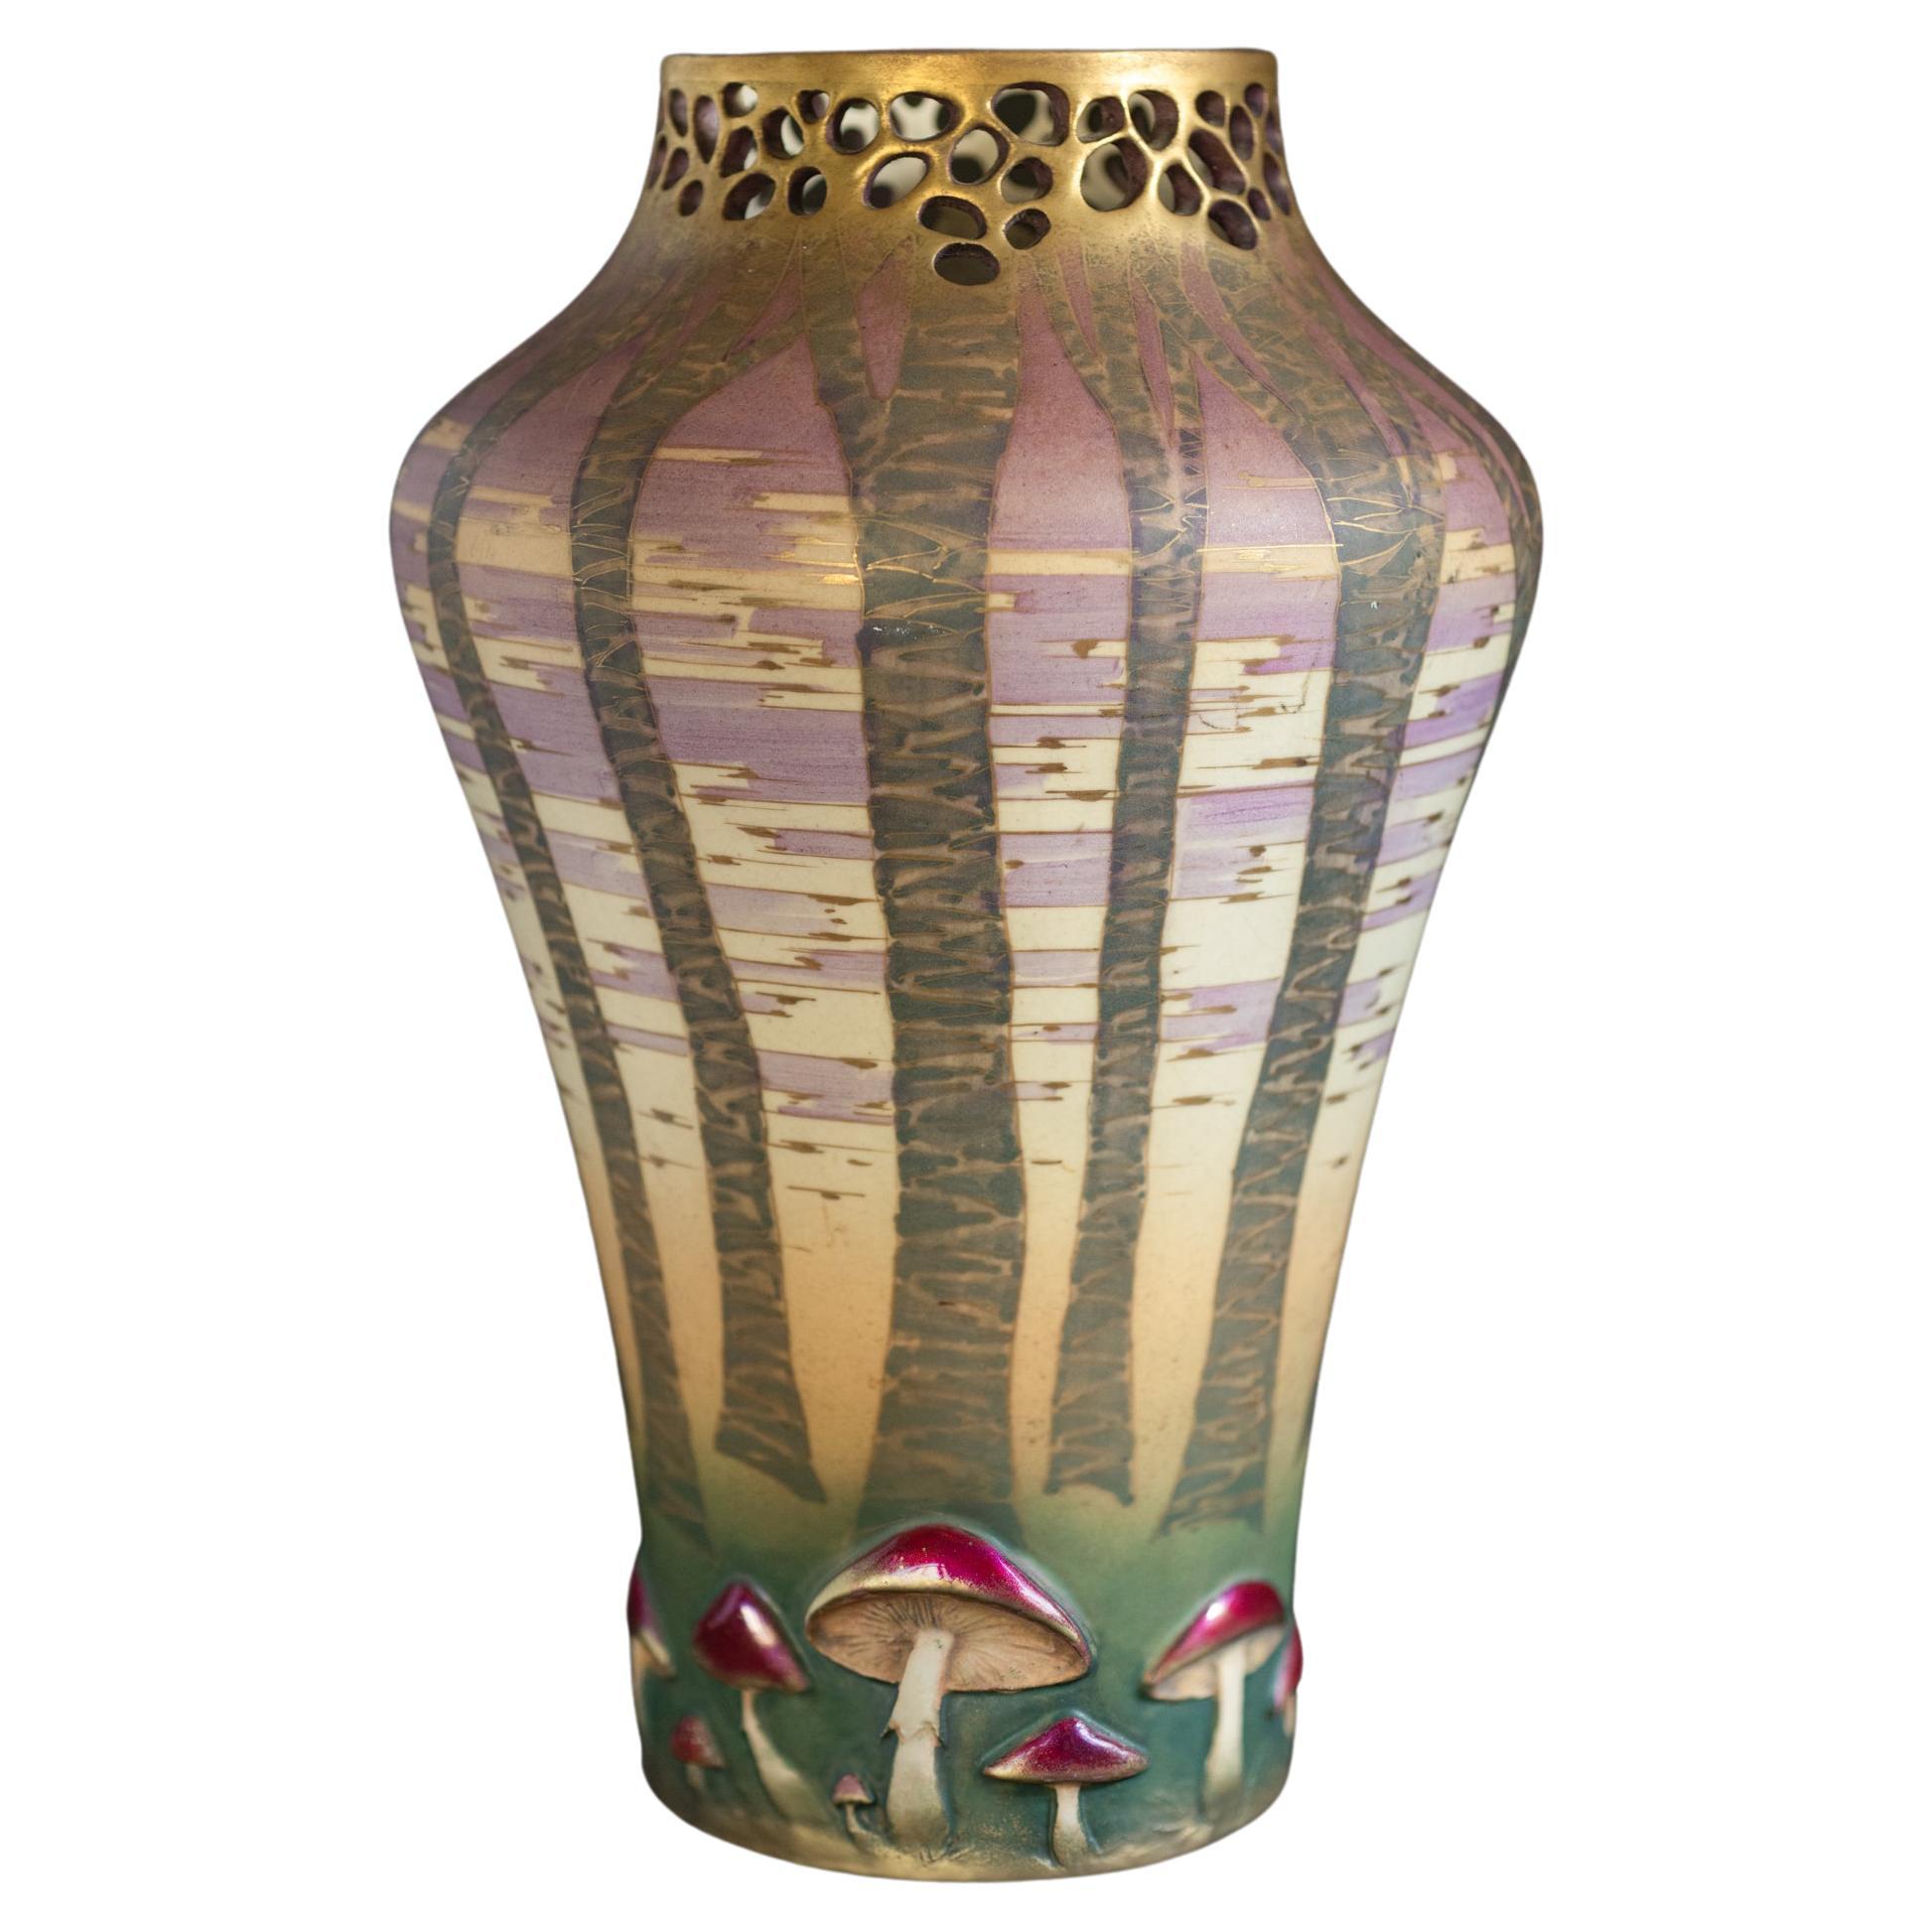 Amphora Reticulated Vase with Forest & Mushroom by Paul Dachsel for Kunstkeramik